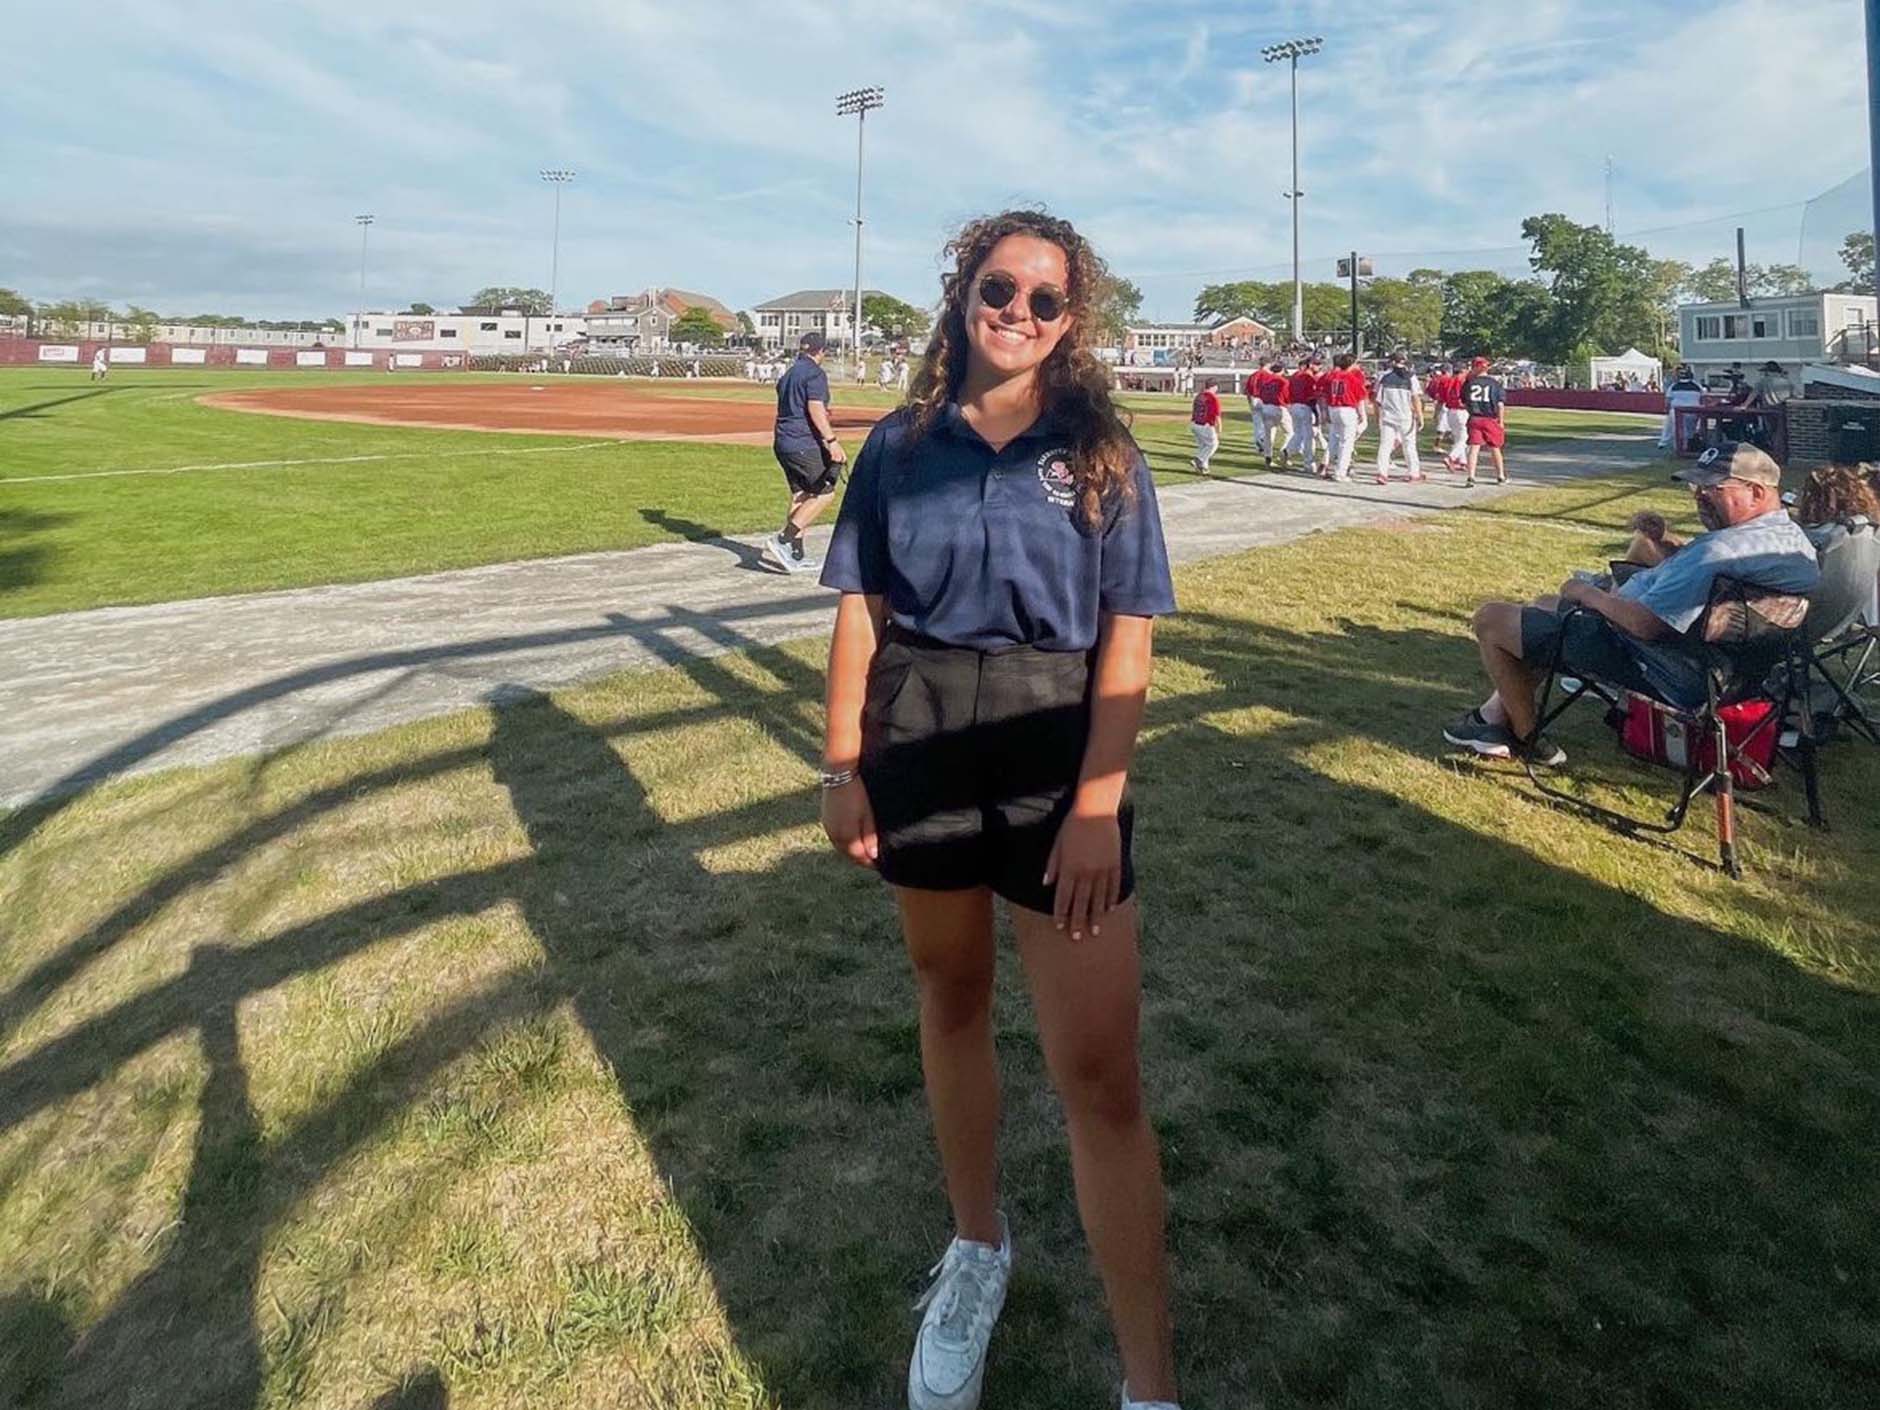 Interning with the Yarmouth–Dennis Red Sox over the summer, sport management major and communication minor Shaela Nally ’25 got first-hand experience in the world of baseball.